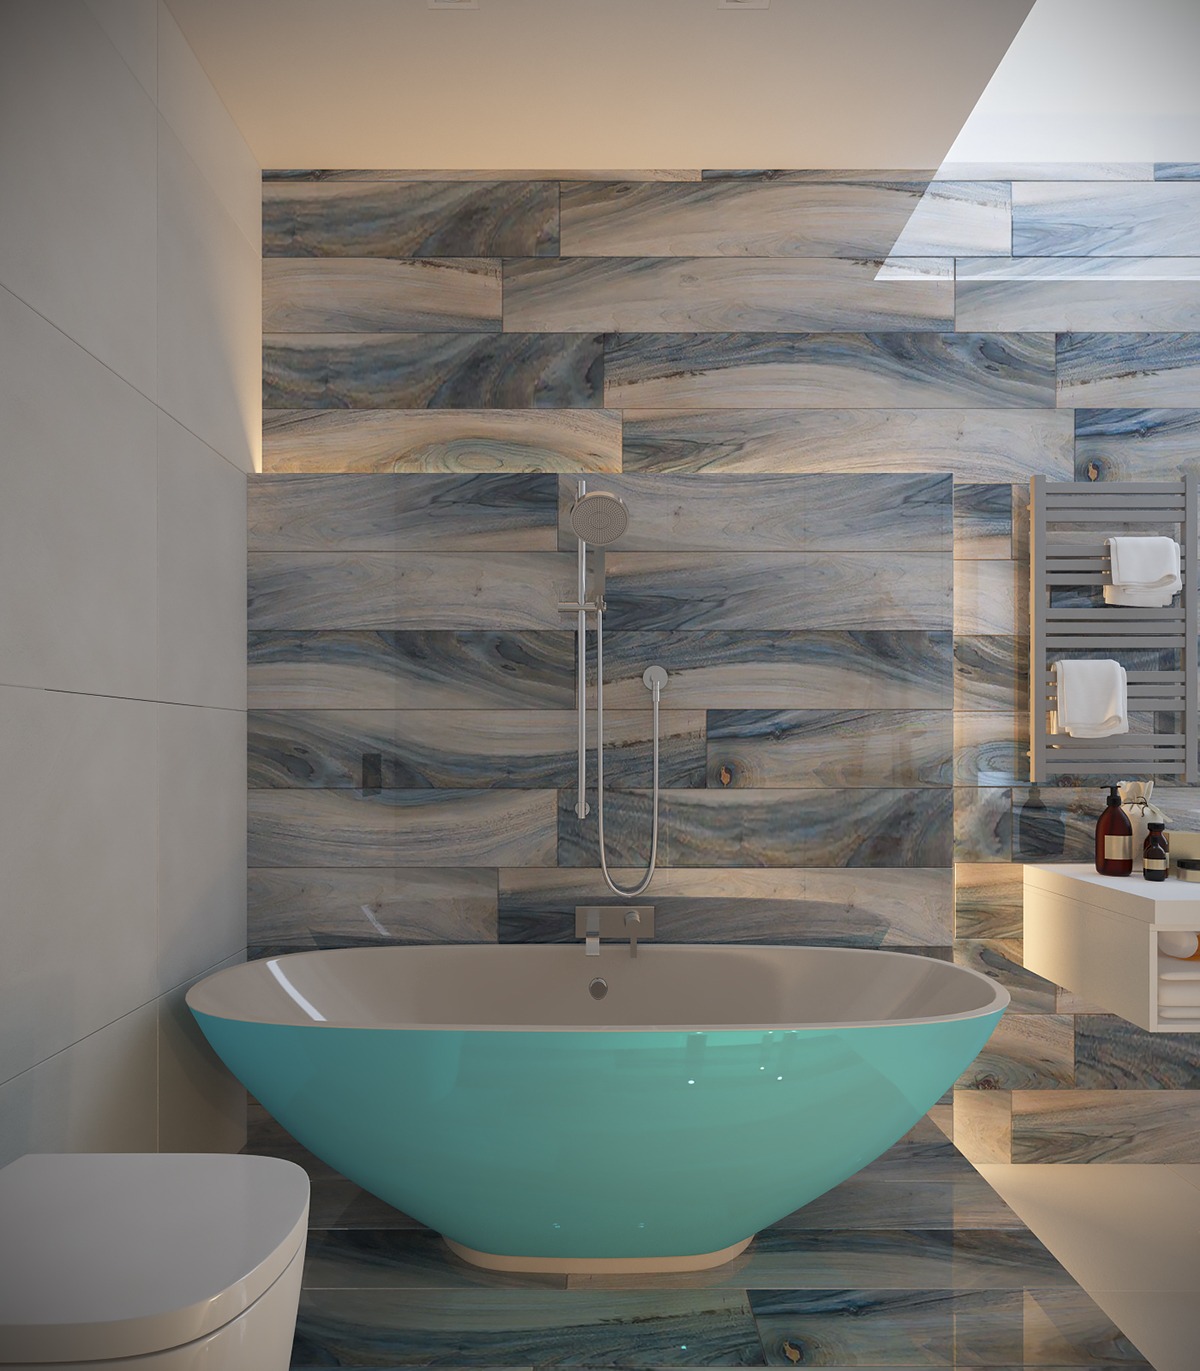 natural blue bathroom inspiration "width =" 1200 "height =" 1371 "srcset =" https://mileray.com/wp-content/uploads/2020/05/1588515105_129_Tips-How-To-Create-a-Beautiful-and-Awesome-Bathroom-Decor.jpg 1200w , https://mileray.com/wp-content/uploads/2016/09/natural-blue-bathroom-inspiration-Aleksandr-Svyryd-263x300.jpg 263w, https://mileray.com/wp-content/uploads/ 2016/09 / natural-blue-bad-inspiration-Aleksandr-Svyryd-768x877.jpg 768w, https://mileray.com/wp-content/uploads/2016/09/natural-blue-bathroom-inspiration-Aleksandr-Svyryd -896x1024.jpg 896w, https://mileray.com/wp-content/uploads/2016/09/natural-blue-bathroom-inspiration-Aleksandr-Svyryd-696x795.jpg 696w, https://mileray.com/wp -content / uploads / 2016/09 / natural-blue-bad-inspiration-Aleksandr-Svyryd-1068x1220.jpg 1068w, https://mileray.com/wp-content/uploads/2016/09/natural-blue-bathroom- Inspiration-Aleksandr-Svyryd-368x420.jpg 368w "sizes =" (maximum width: 1200px) 100vw, 1200px